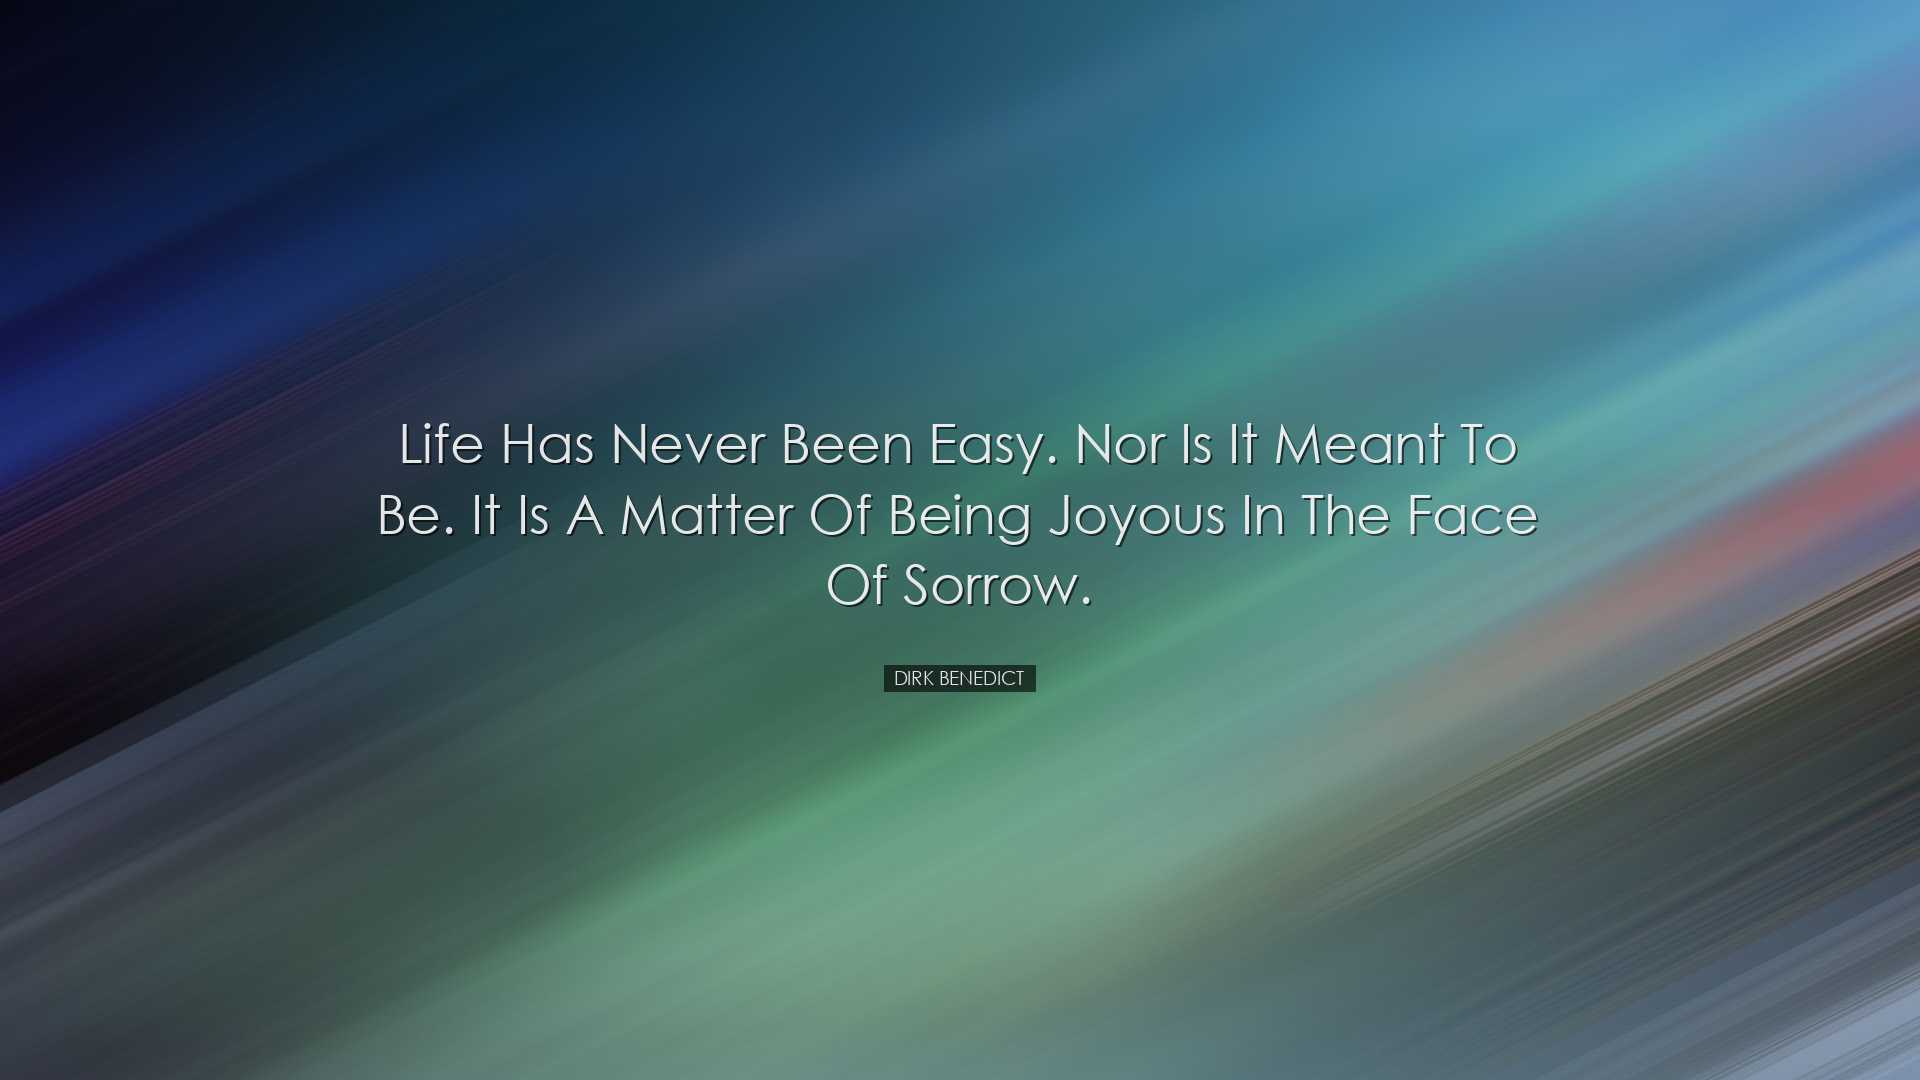 Life has never been easy. Nor is it meant to be. It is a matter of